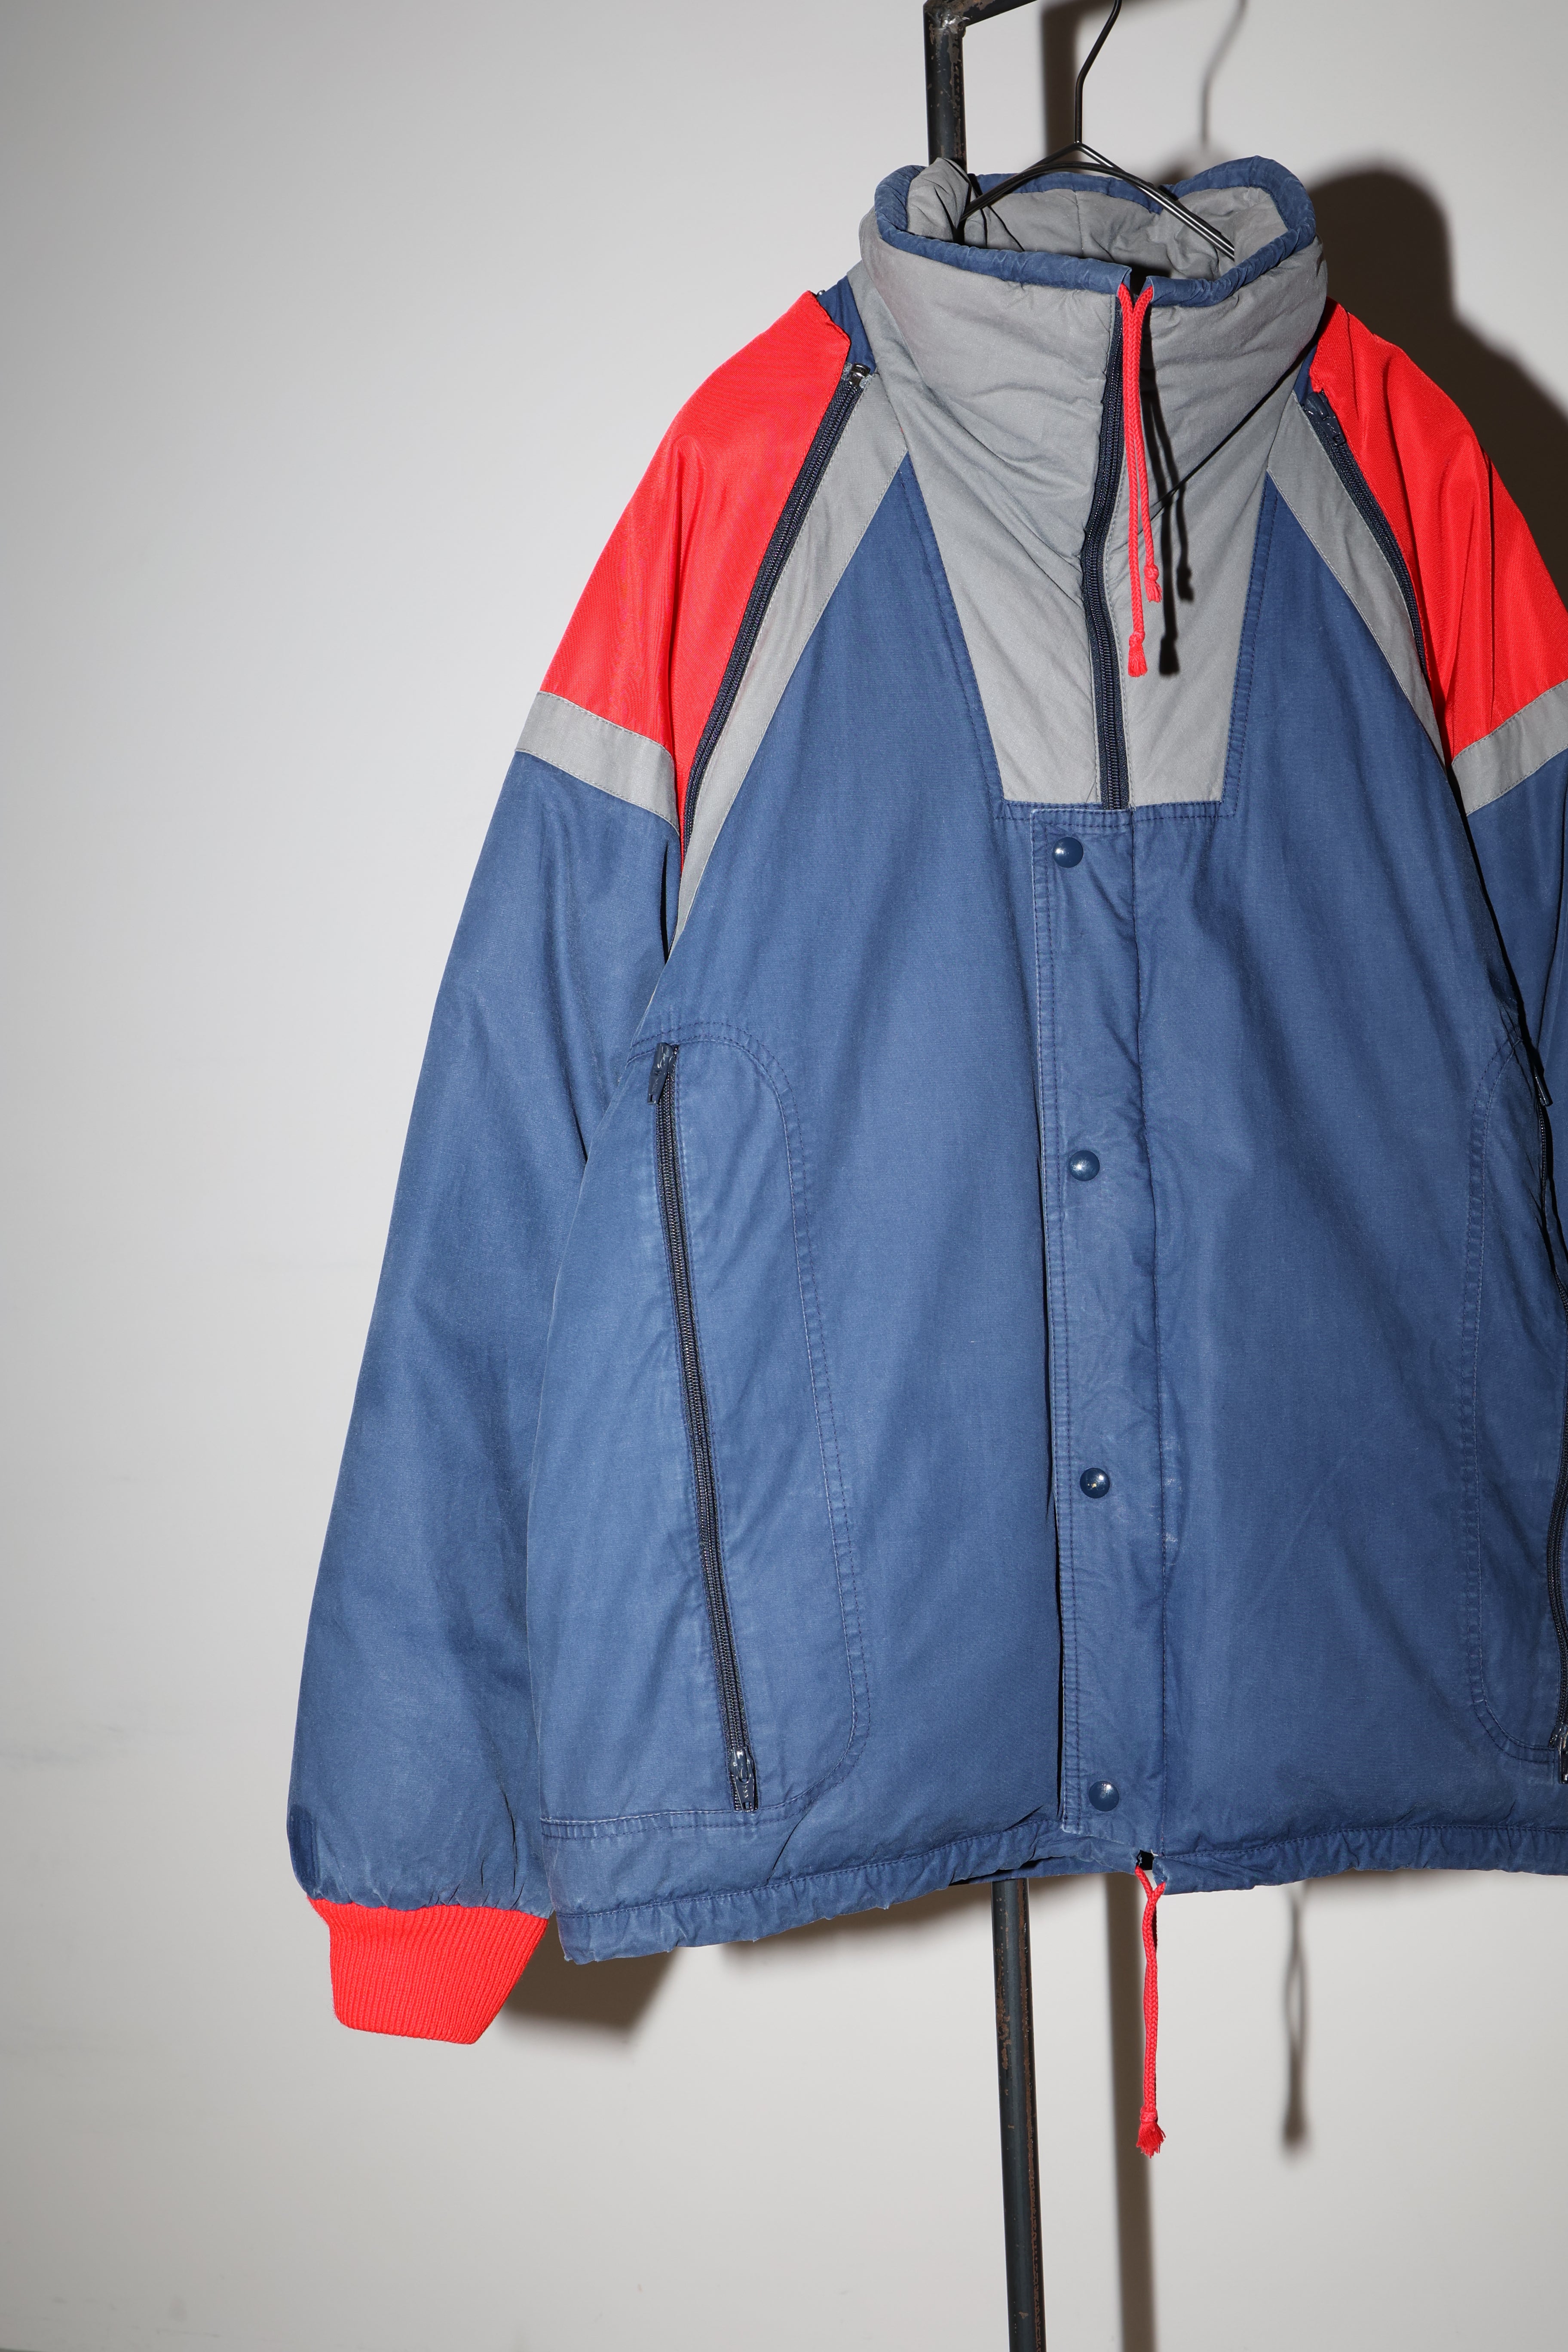 80’s cotton down jacket with gimmick design